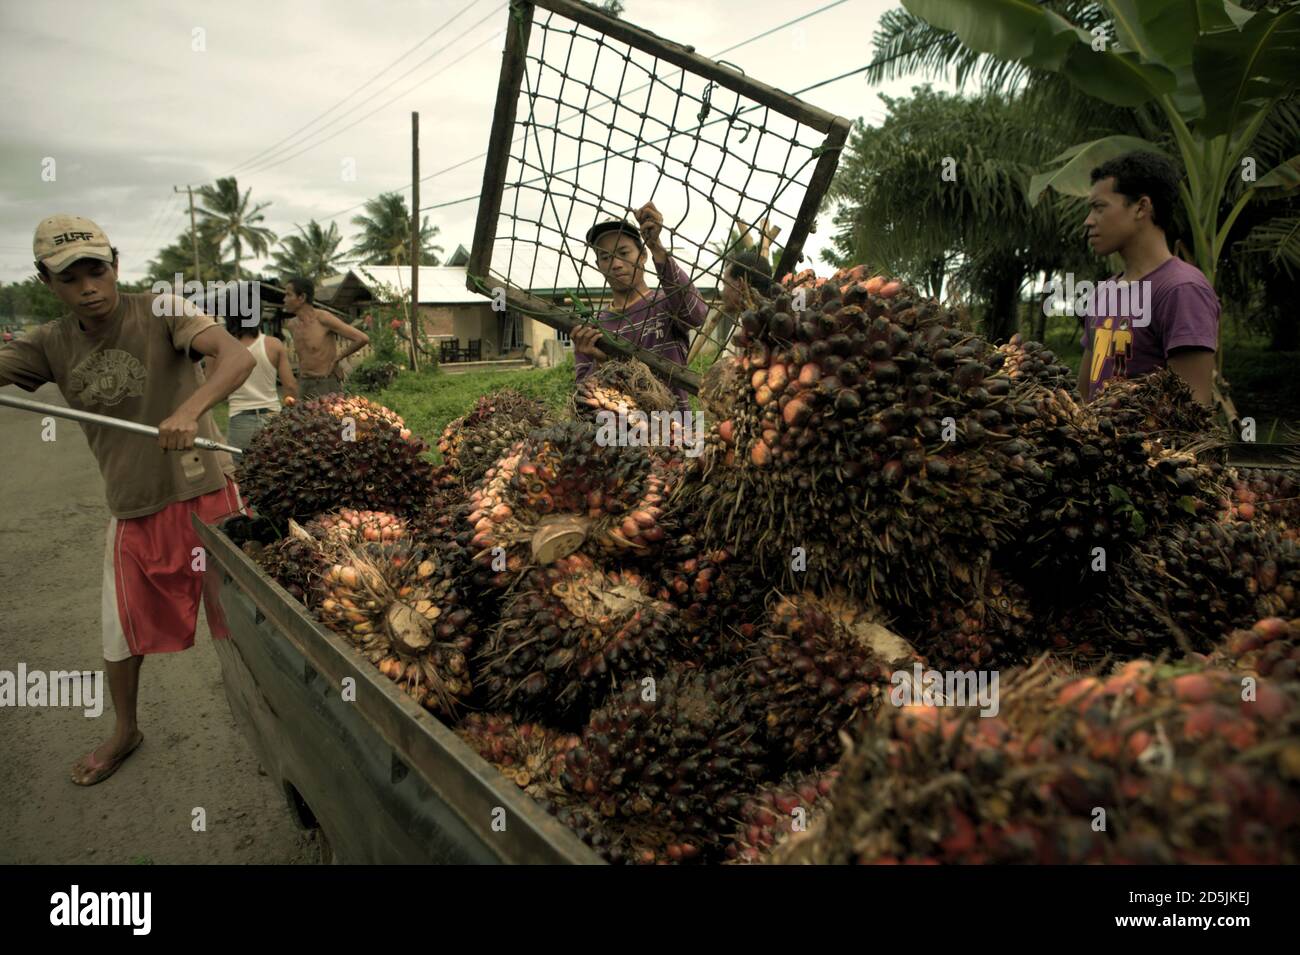 People loading freshly harvested oil palm fruits onto a pick-up truck on the side of a road in Bengkulu province, Sumatra, Indonesia. Stock Photo